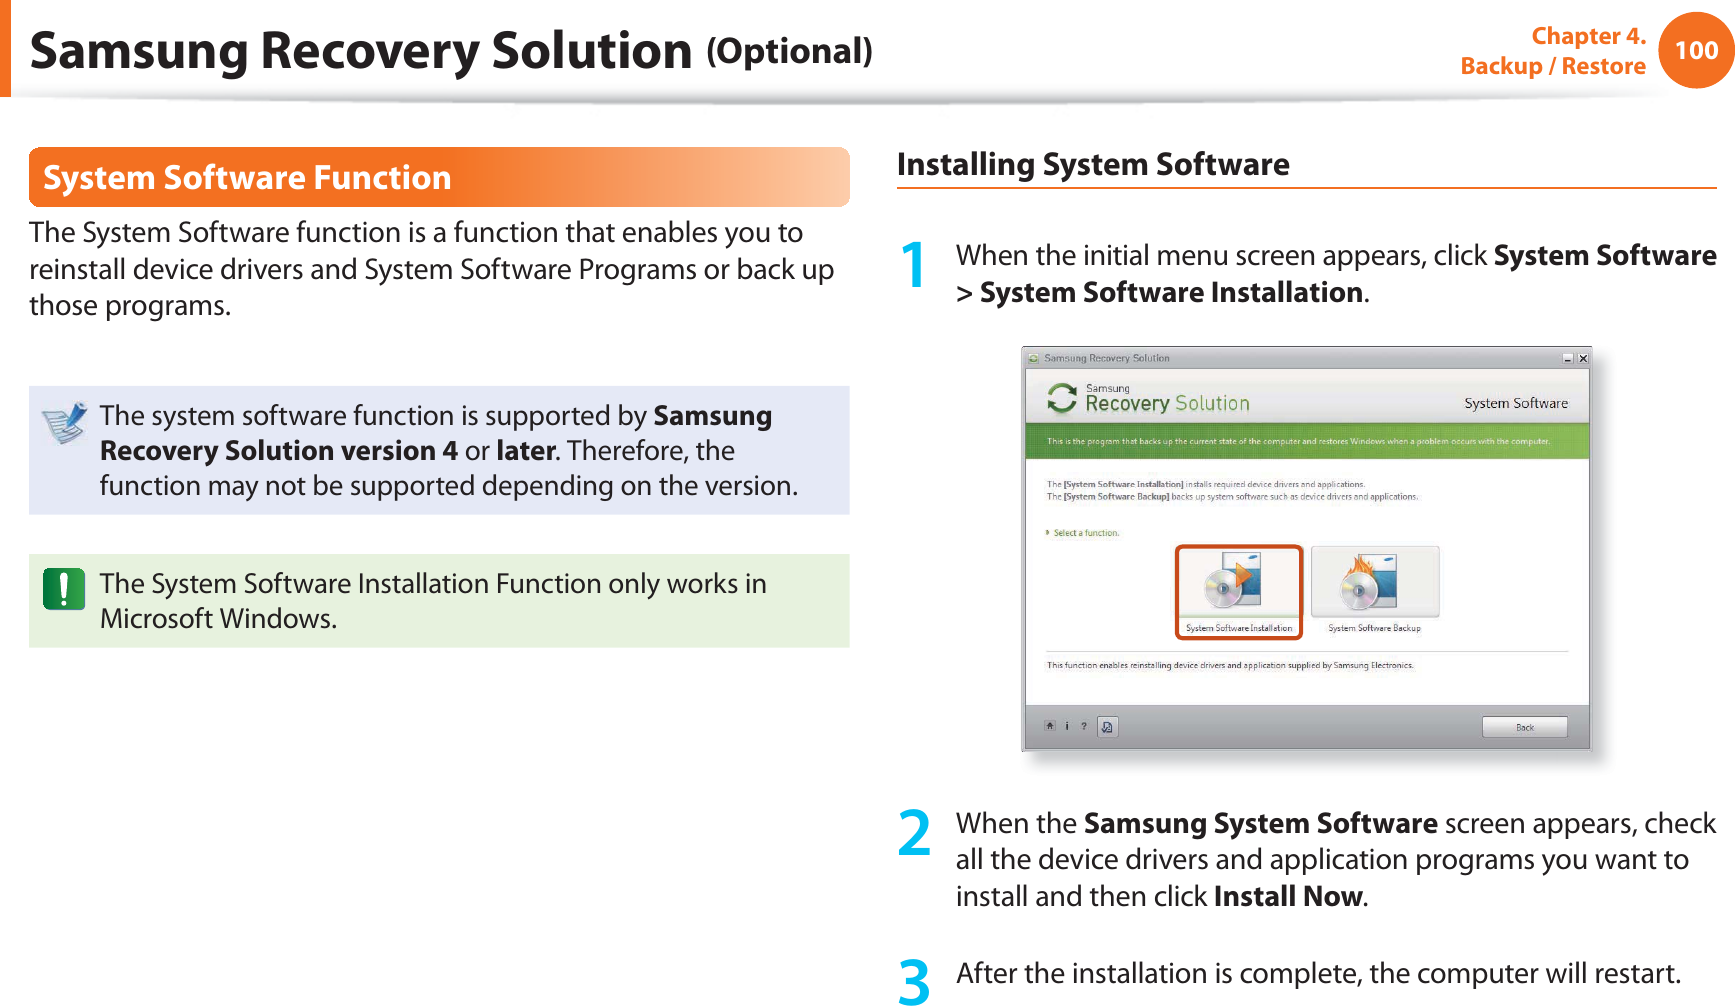 100Chapter 4.  Backup / RestoreSystem Software FunctionThe System Software function is a function that enables you to reinstall device drivers and System Software Programs or back up those programs. The system software function is supported by Samsung Recovery Solution version 4 or later. Therefore, the function may not be supported depending on the version.The System Software Installation Function only works in Microsoft Windows.Installing System Software1  When the initial menu screen appears, click System Software &gt; System Software Installation.2 When the Samsung System Software screen appears, check all the device drivers and application programs you want to install and then click Install Now.3  After the installation is complete, the computer will restart.Samsung Recovery Solution (Optional)